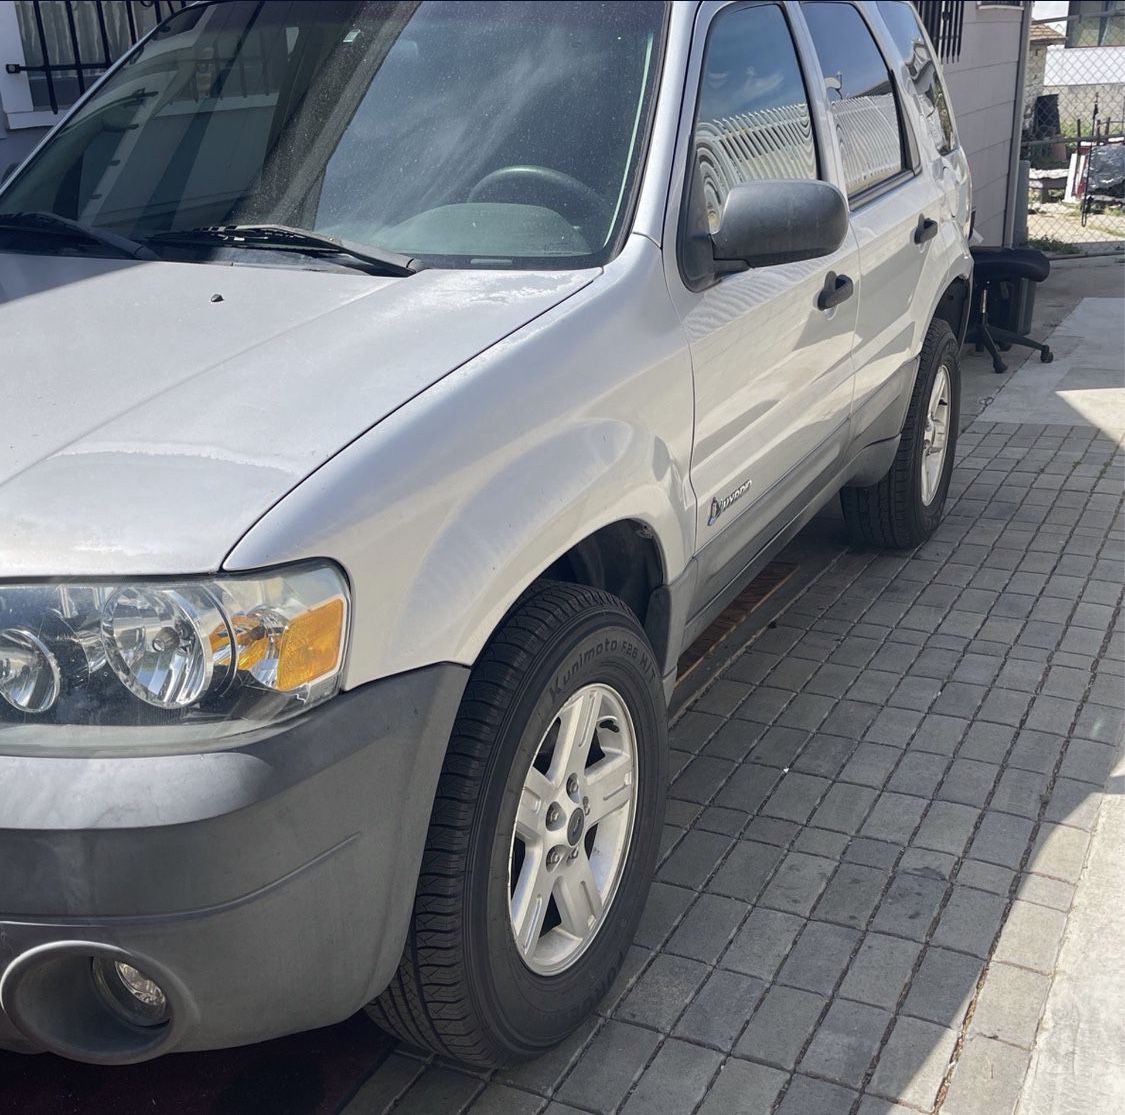 2006 Ford Escape Hybrid for Sale in Los Angeles, CA - OfferUp